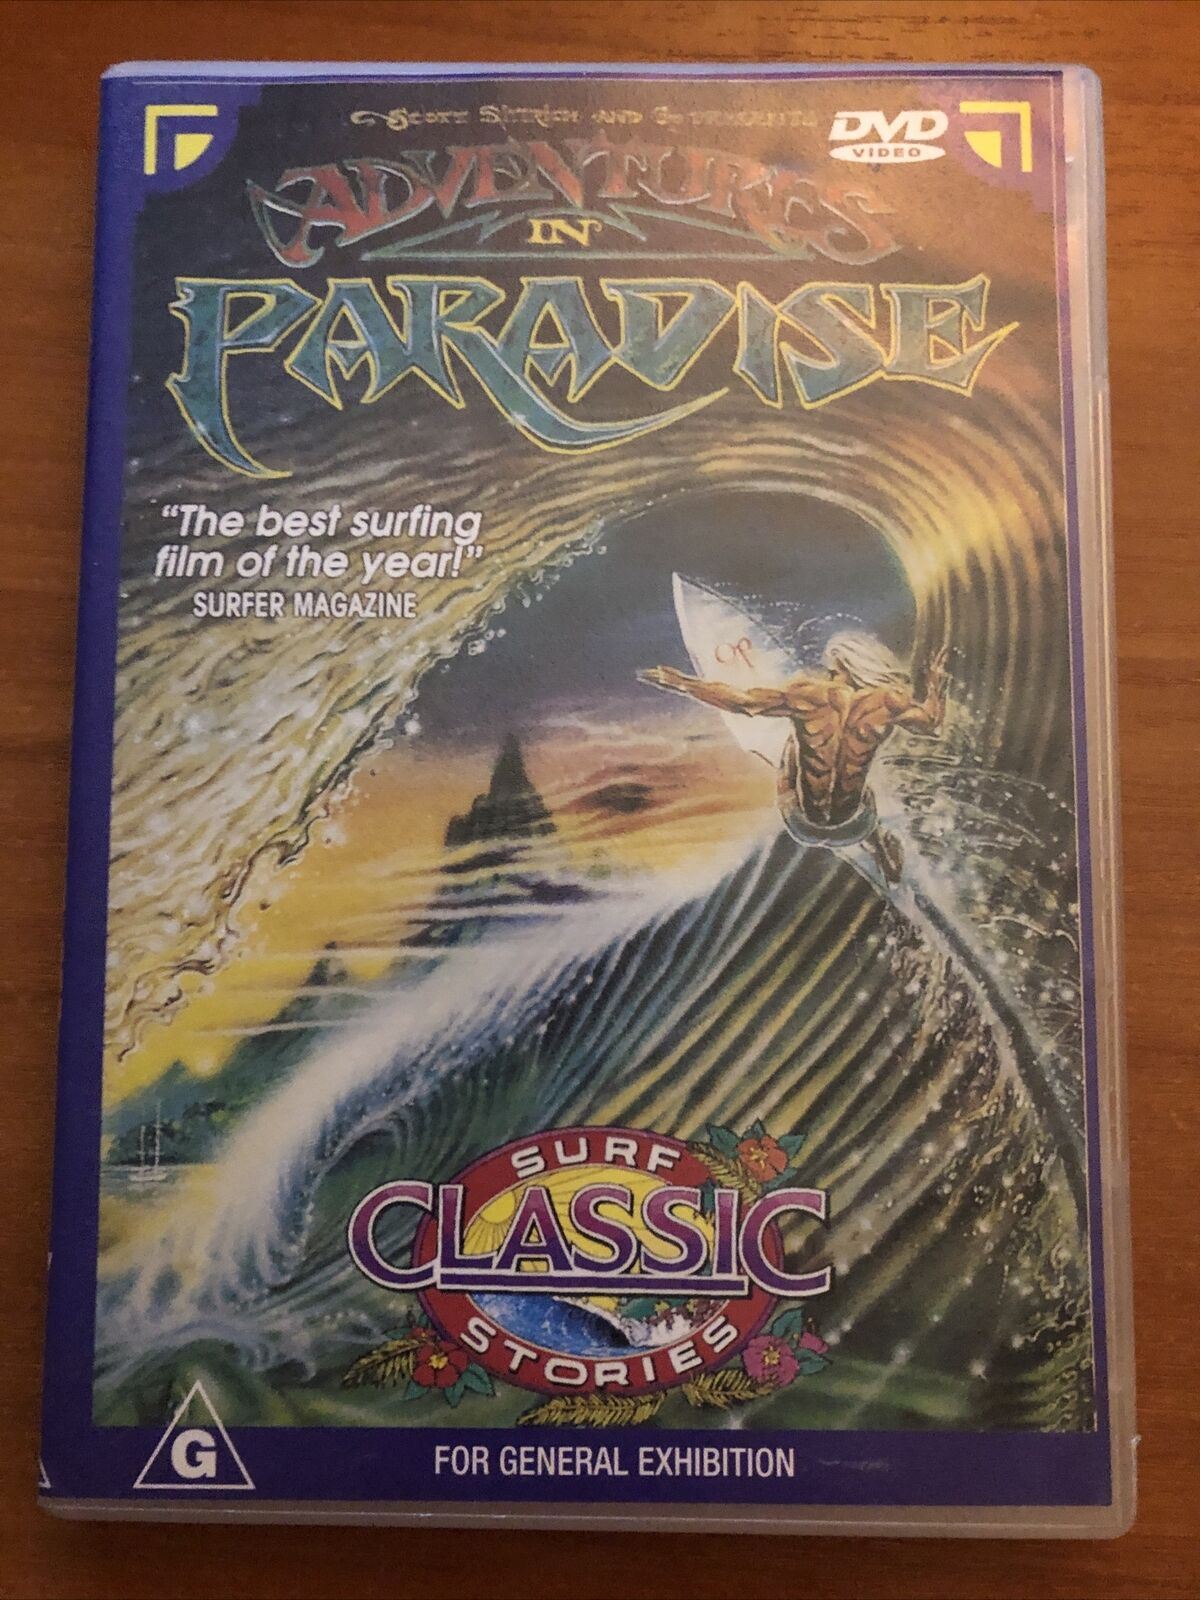 Classic Surf Stories - Adventures In Paradise - DVD (surfing)